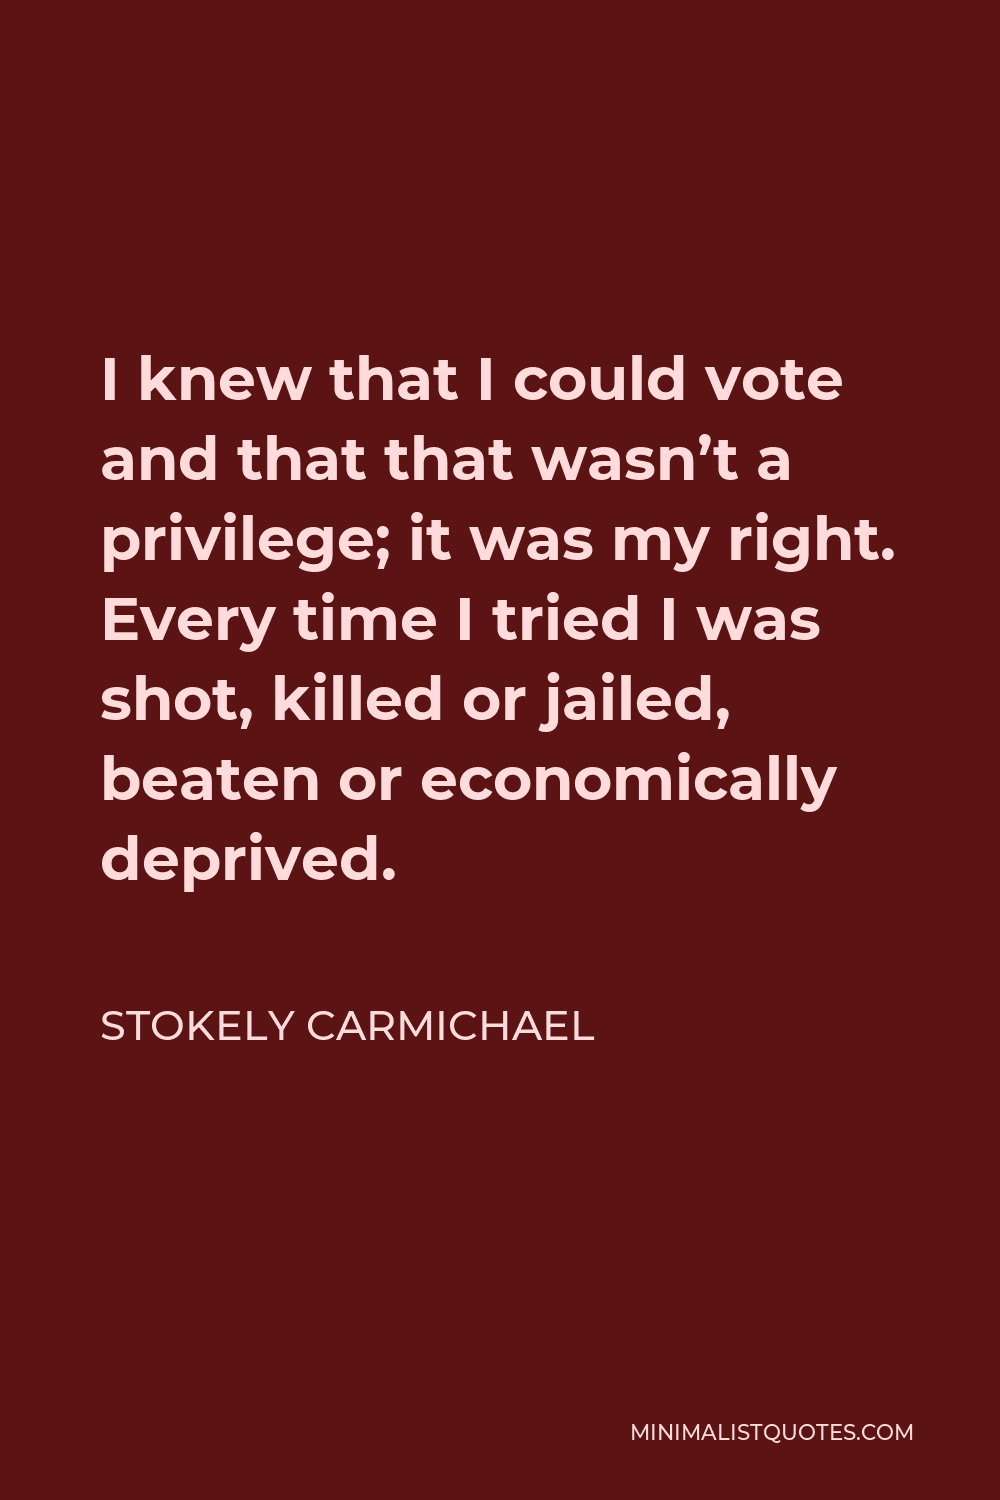 Stokely Carmichael Quote - I knew that I could vote and that that wasn’t a privilege; it was my right. Every time I tried I was shot, killed or jailed, beaten or economically deprived.